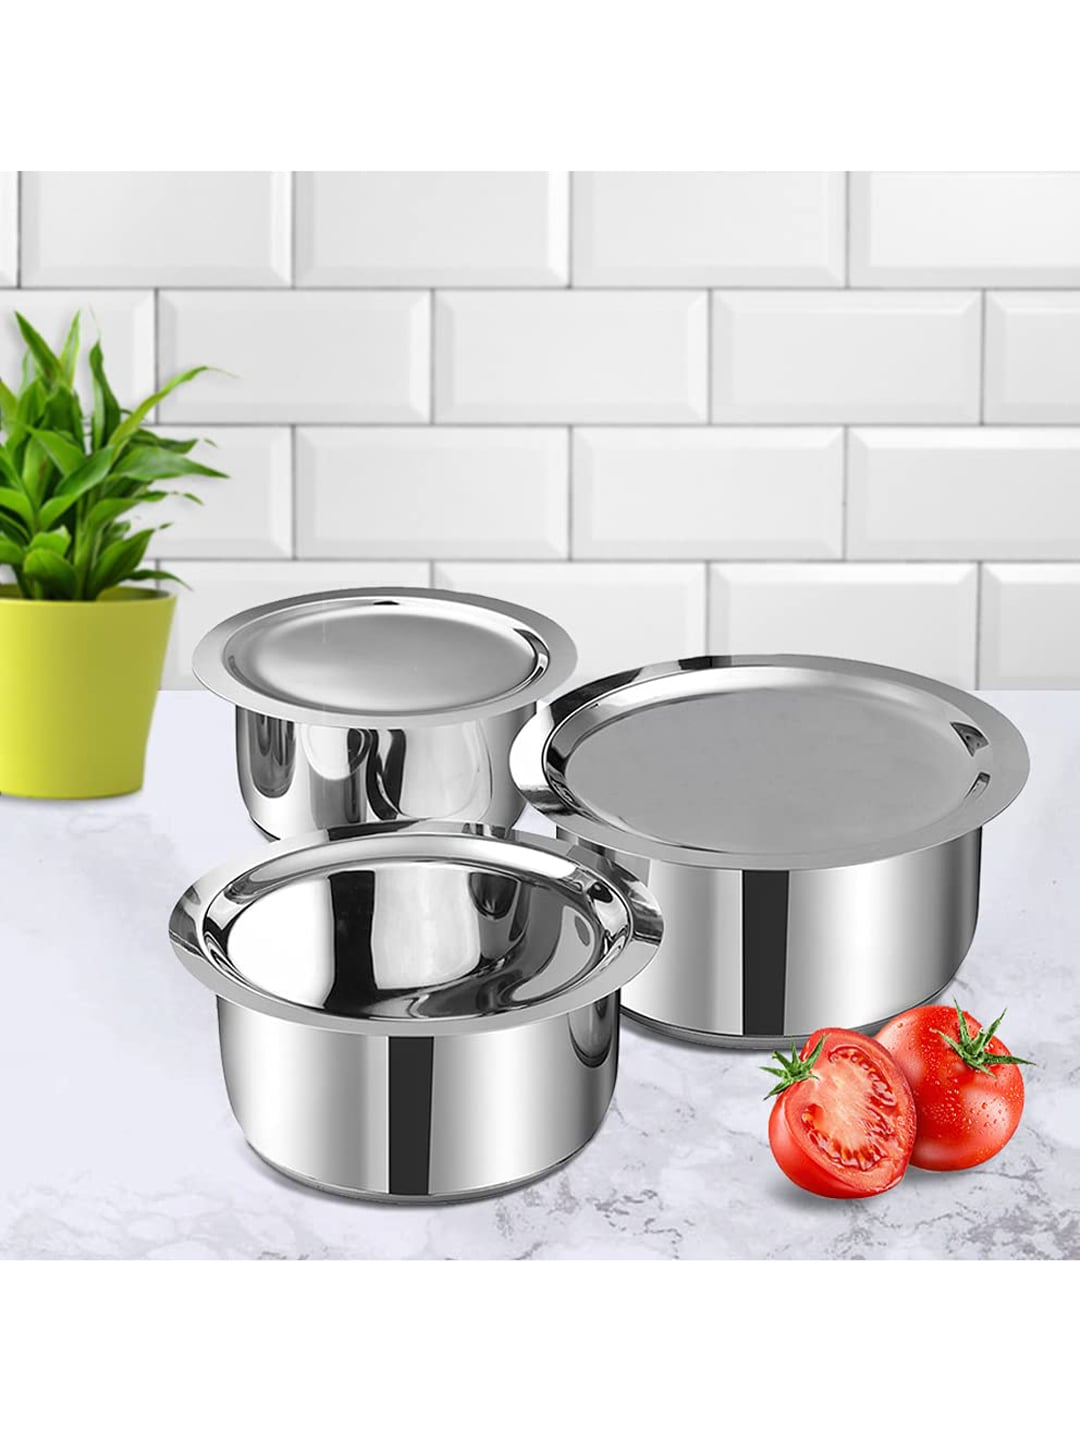 Vinod Set of 3 Silver-Toned Stainless Steel Solid Topes 5400ml Price in India